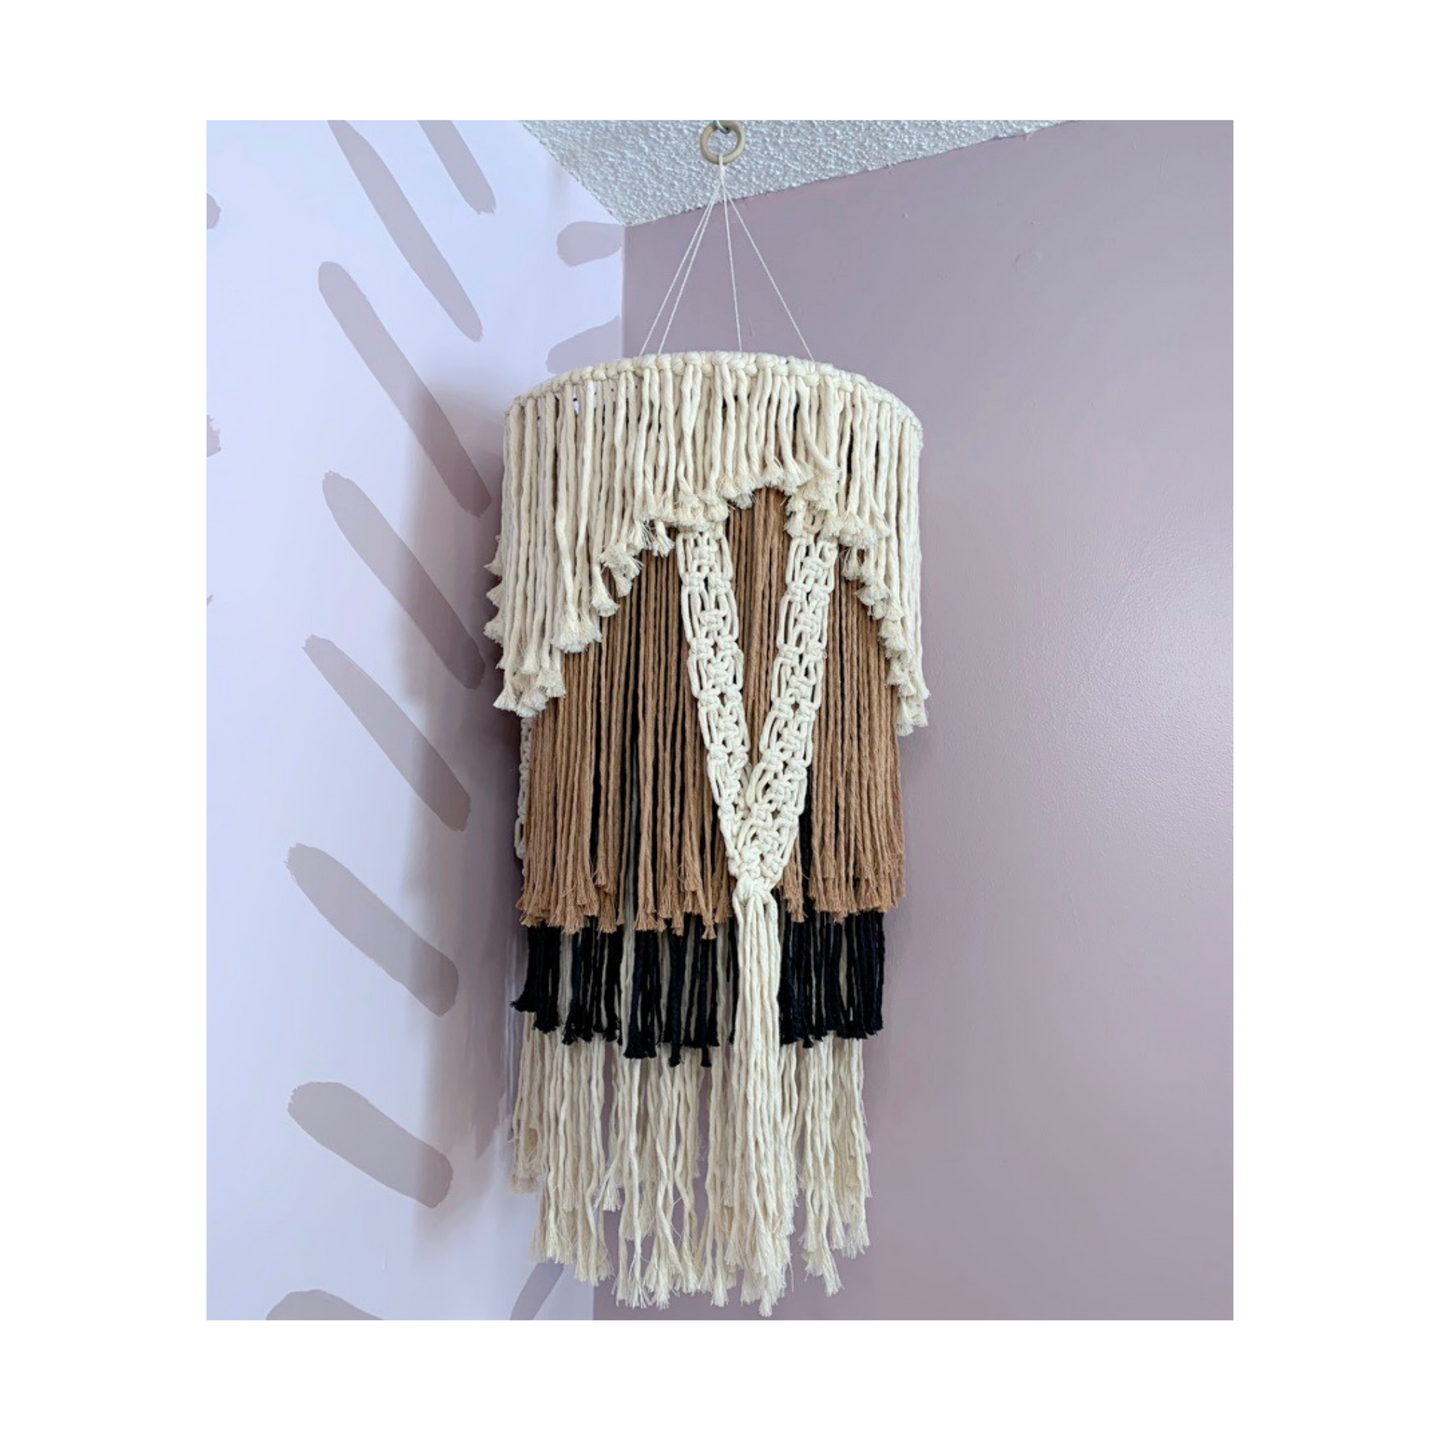 This eloquent chandelier looks stunning from an elevated ceiling or hung in the corner of any room. The multilayers of fringe are made with 100% recycled cotton cord.